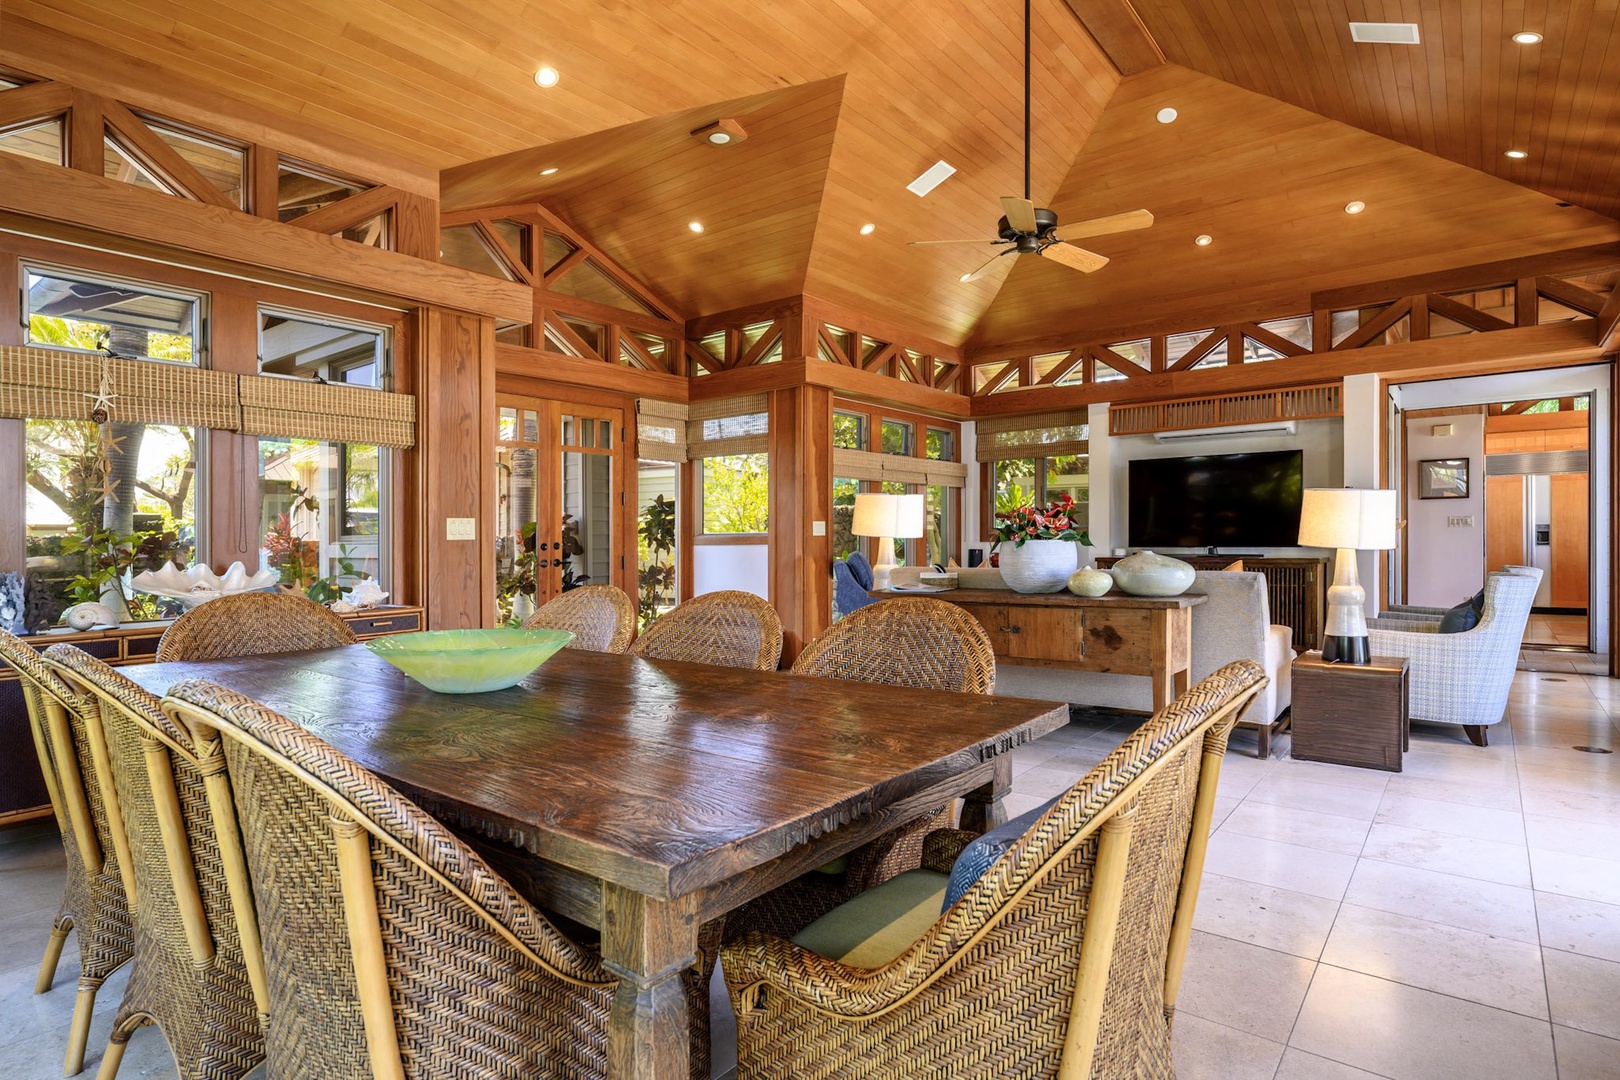 Kamuela Vacation Rentals, 3BD Na Hale 3 at Pauoa Beach Club at Mauna Lani Resort - The island charm of the dining area with table for eight.